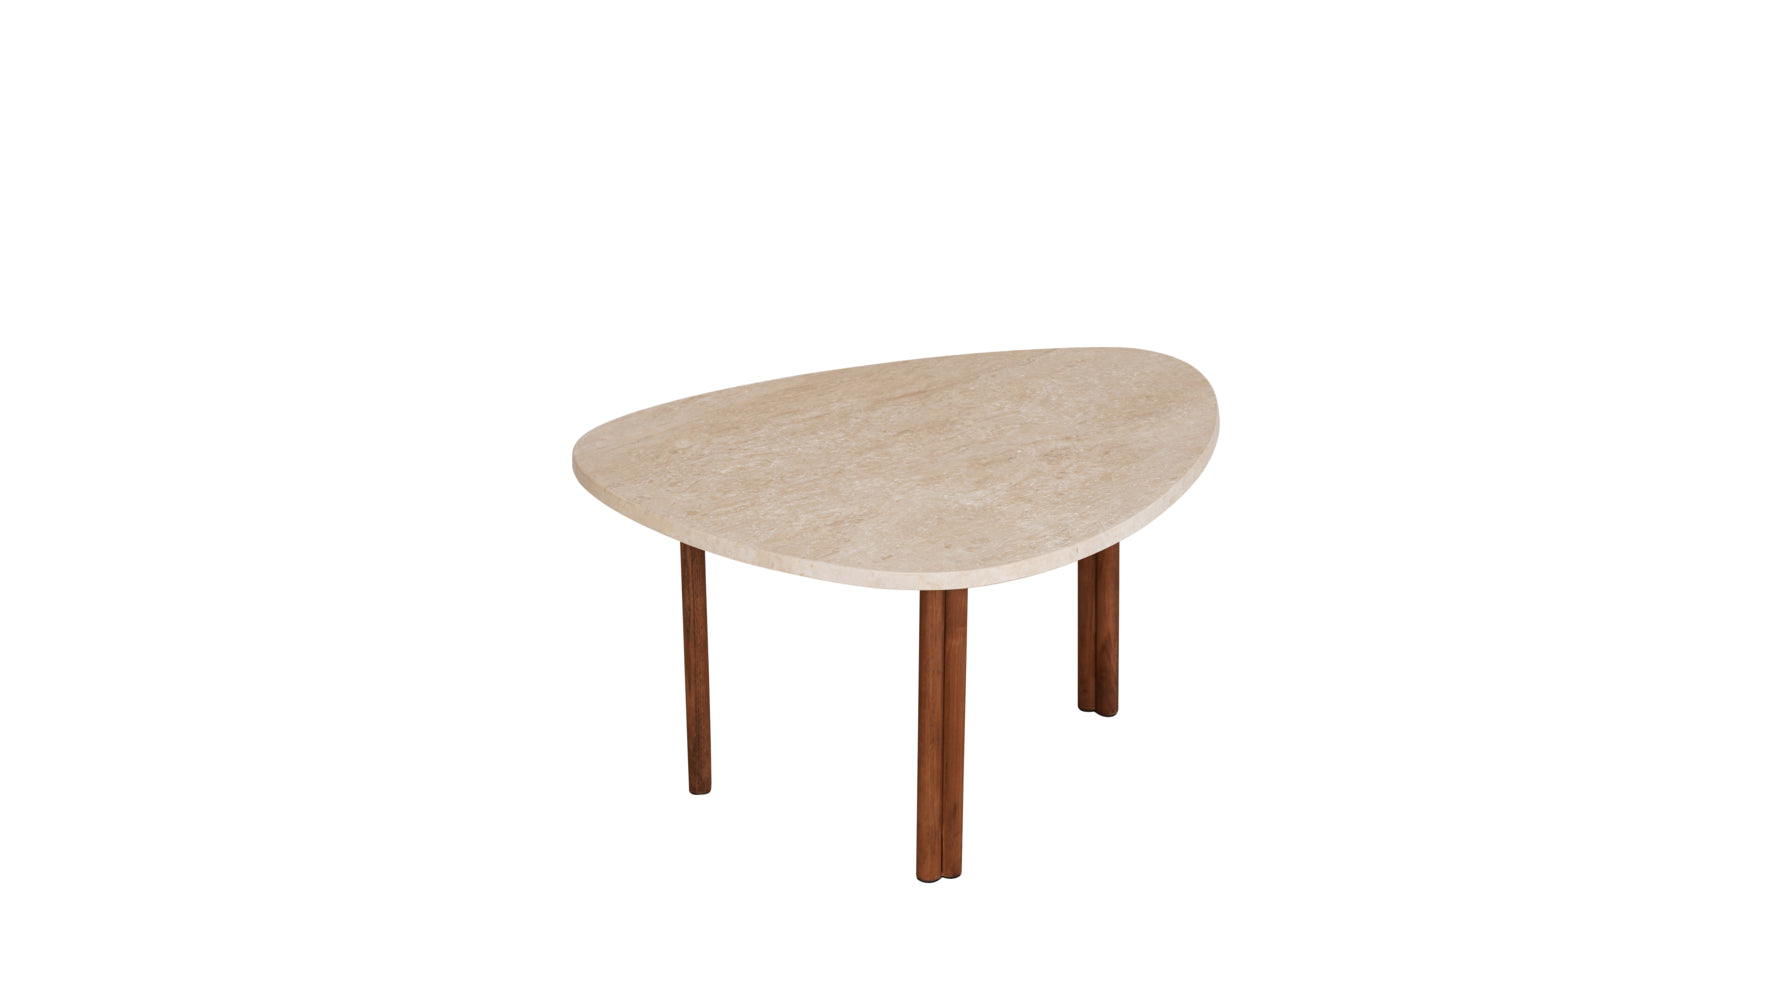 Better Together Coffee Table, Small, Beige Travertine/Walnut Stained Ash - Image 4